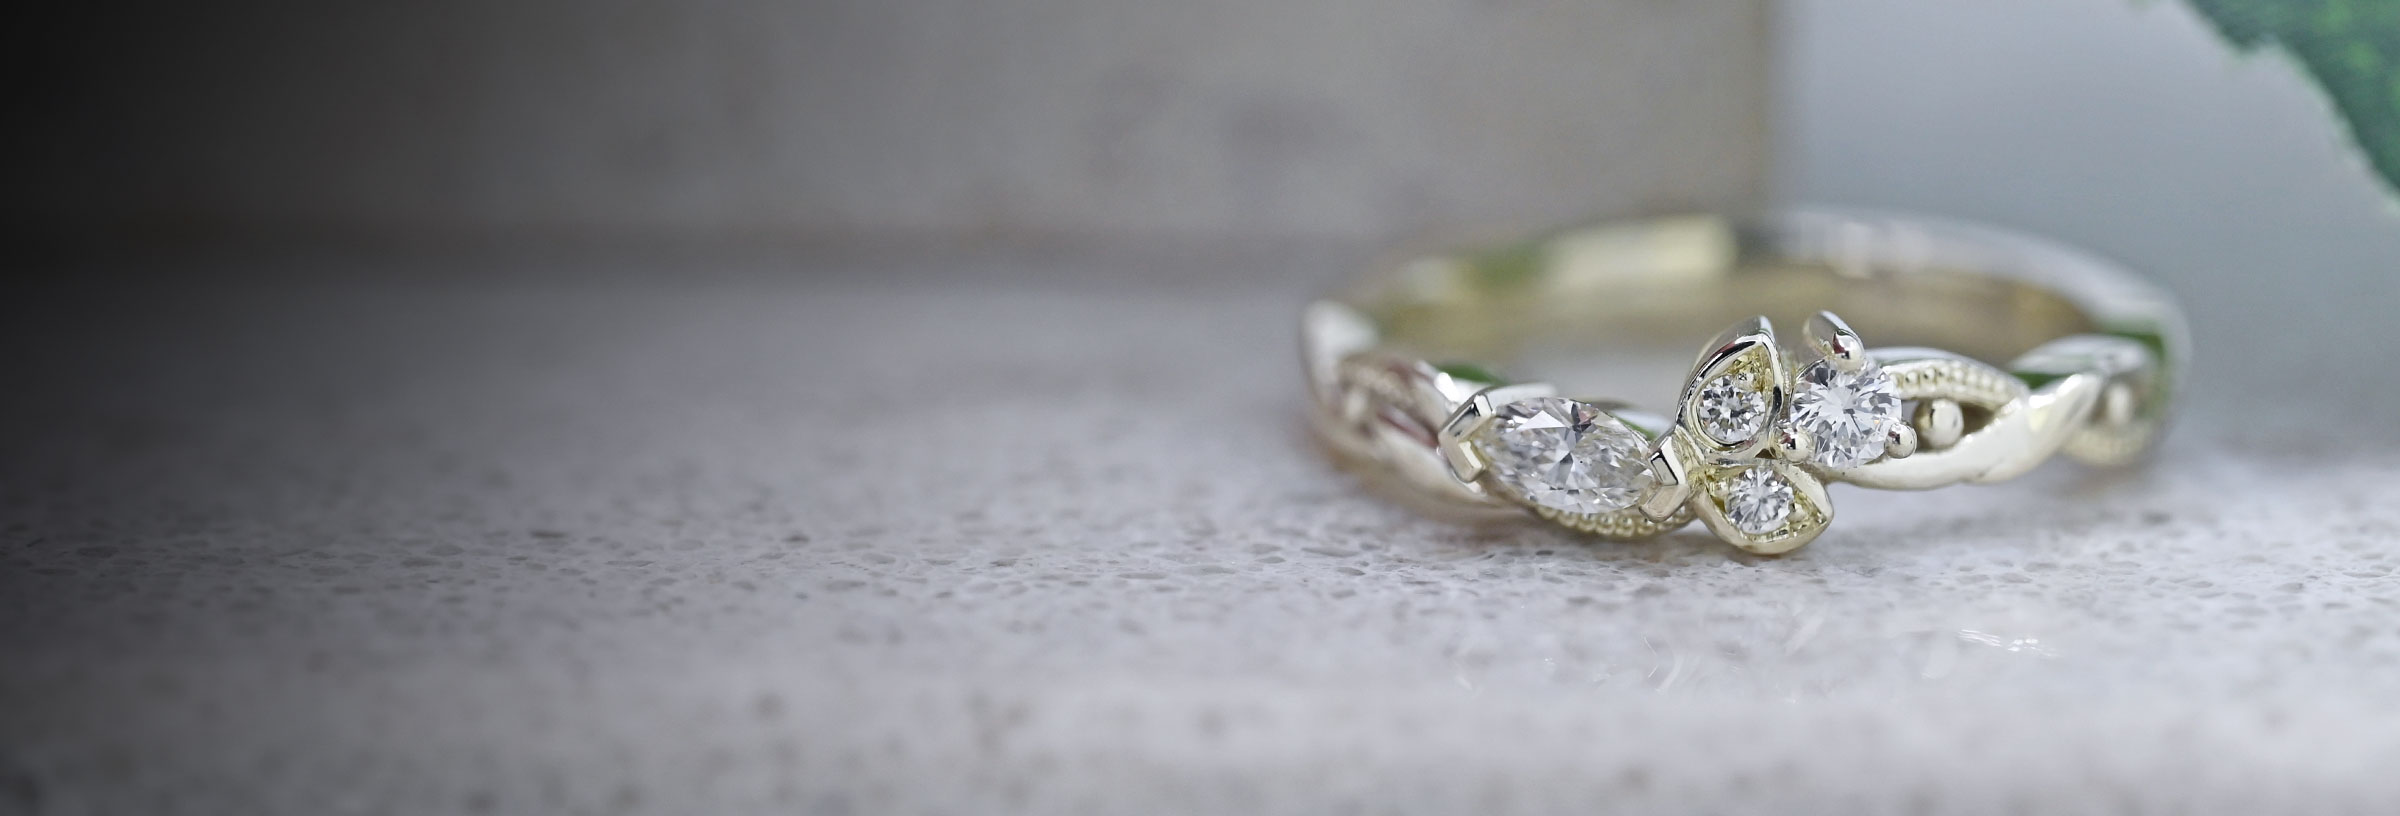 Vintage & nature inspired halo engagement ring